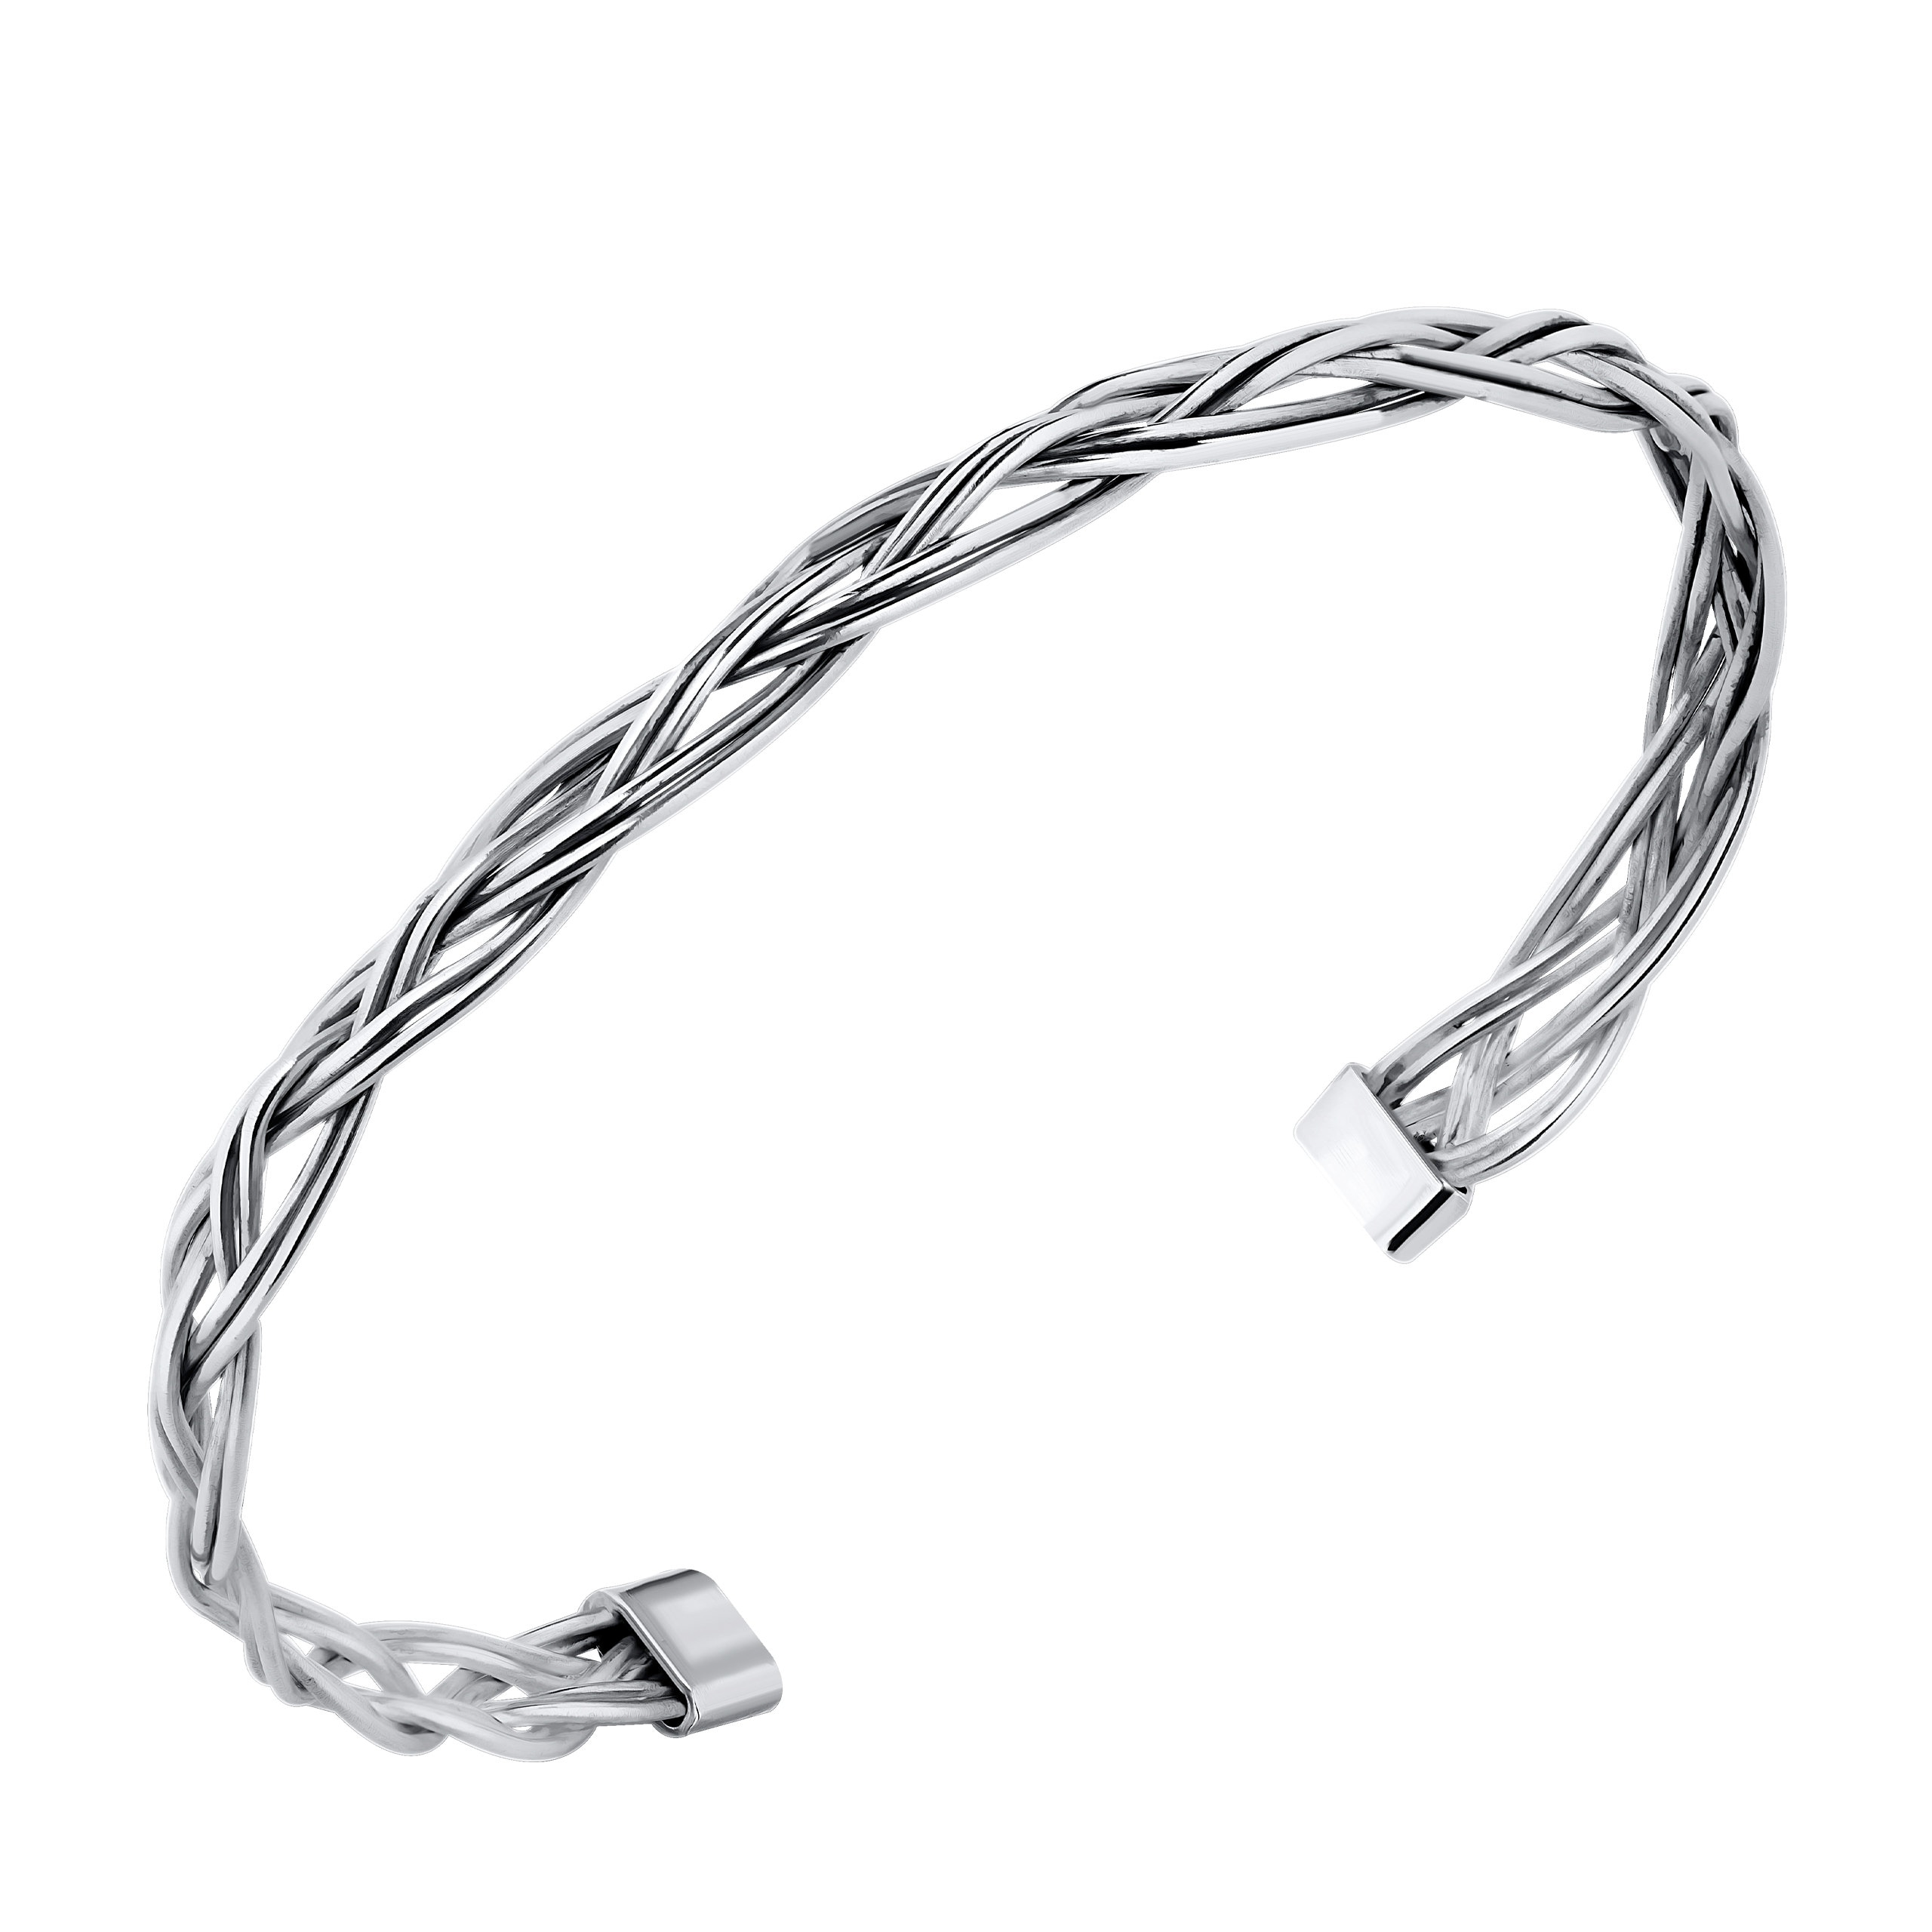 Mens Ladies Solid 925 Sterling Silver Cuff Bangle Bracelet 7 mm 62 x 50 UK Gift